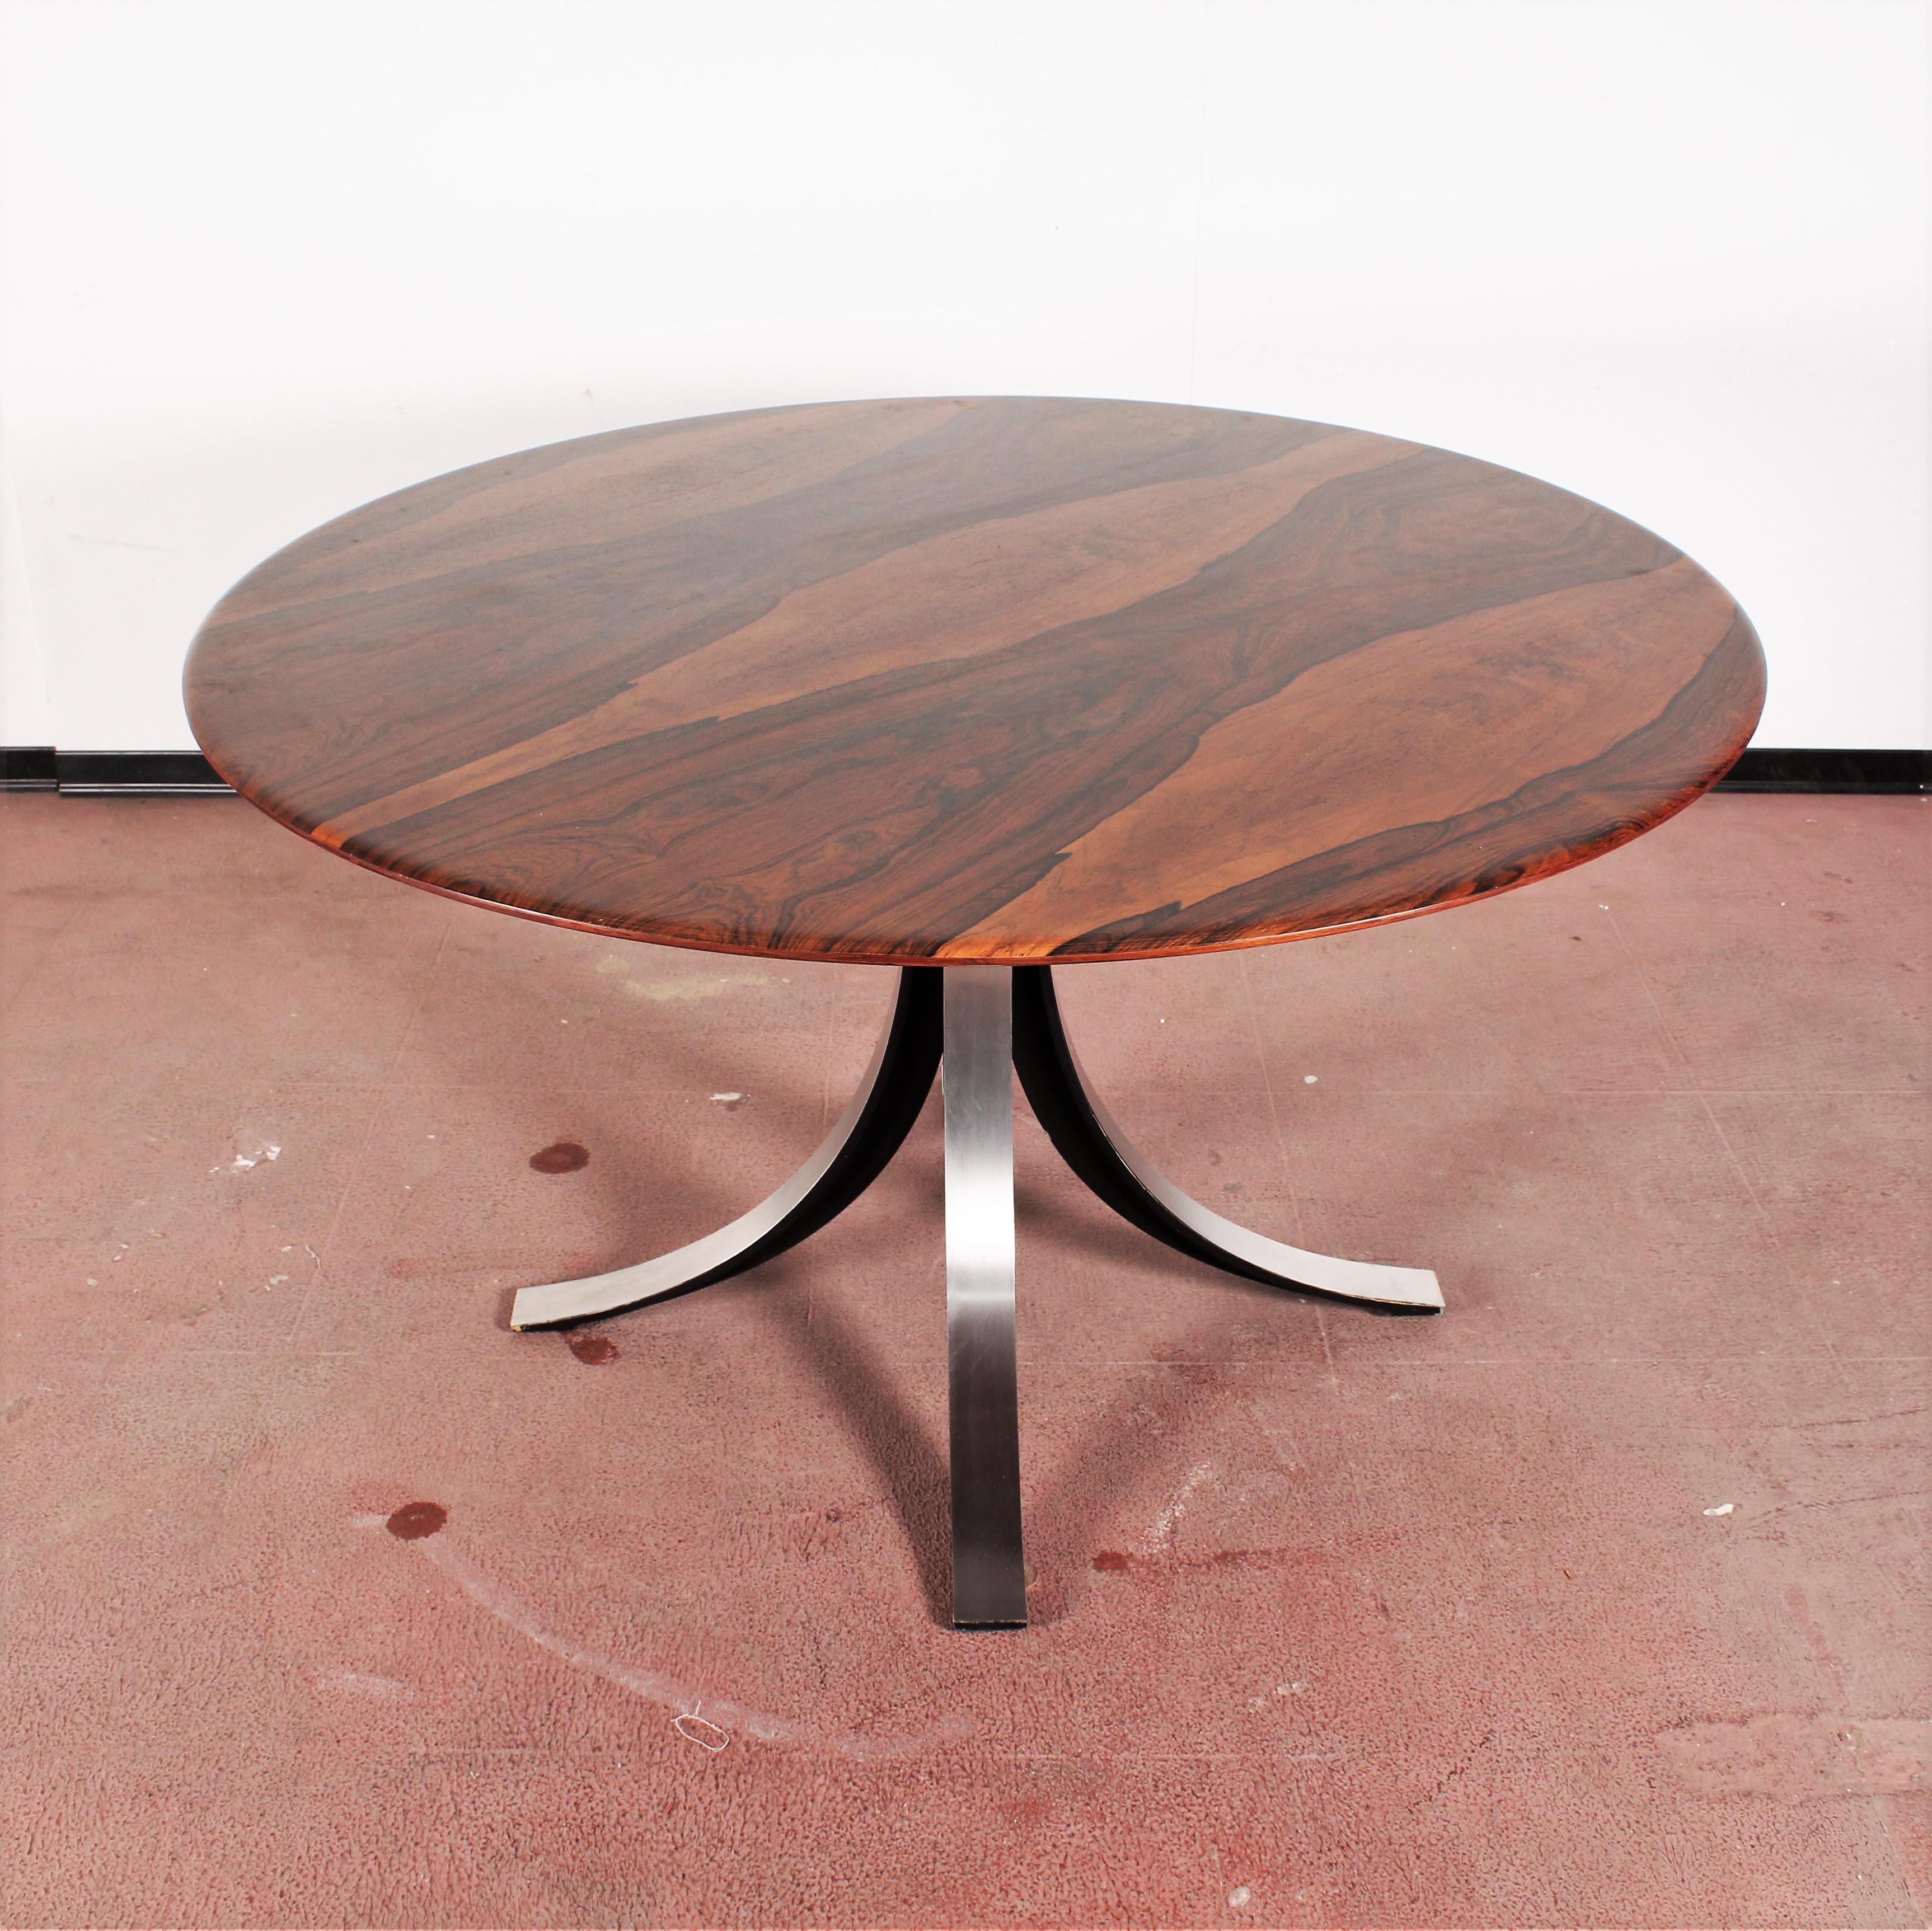 Brushed Midcentury Mod T69, Borsani for Tecno Wood and Metal Circular Table, Italy 1960s